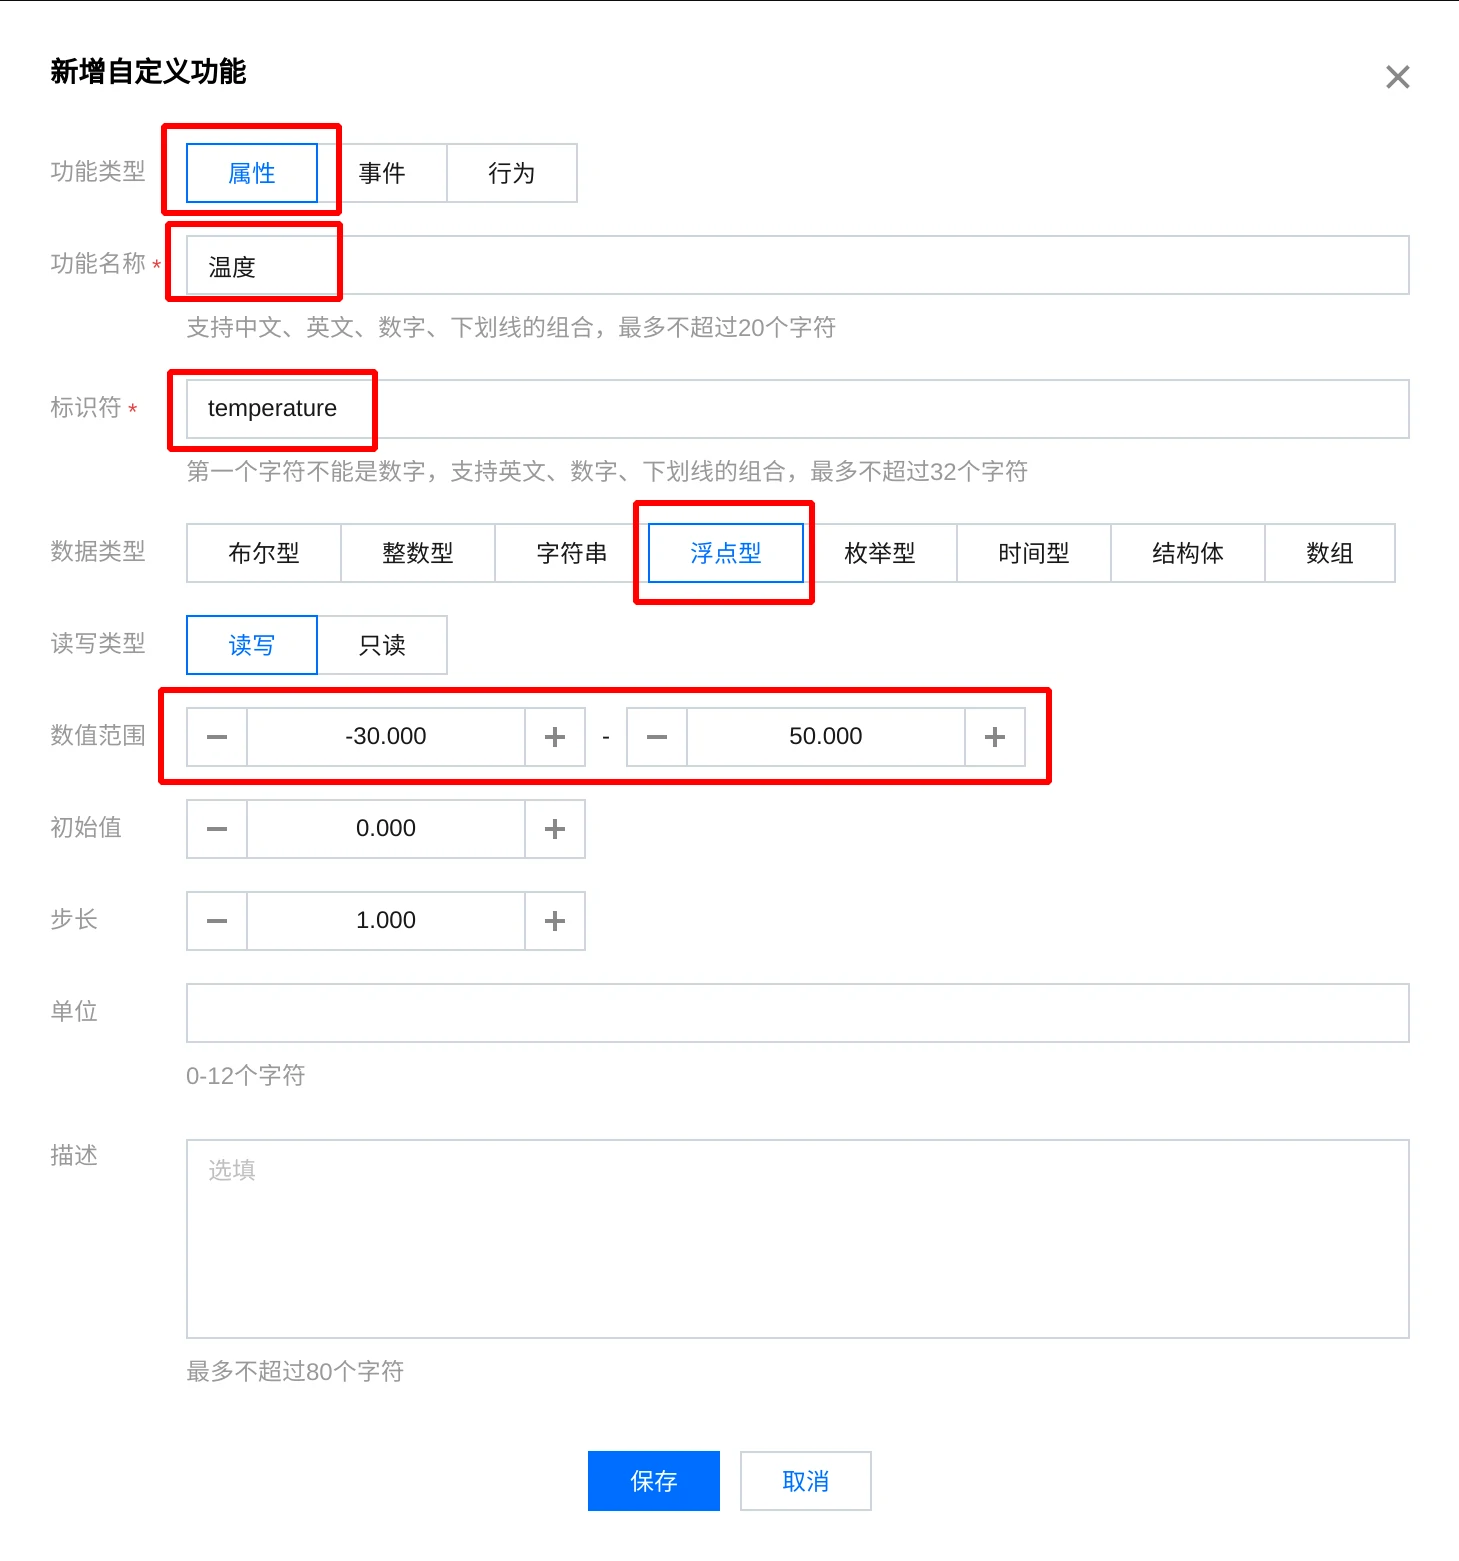 Continue adding and defining functions for your IoT product on Tencent Cloud.